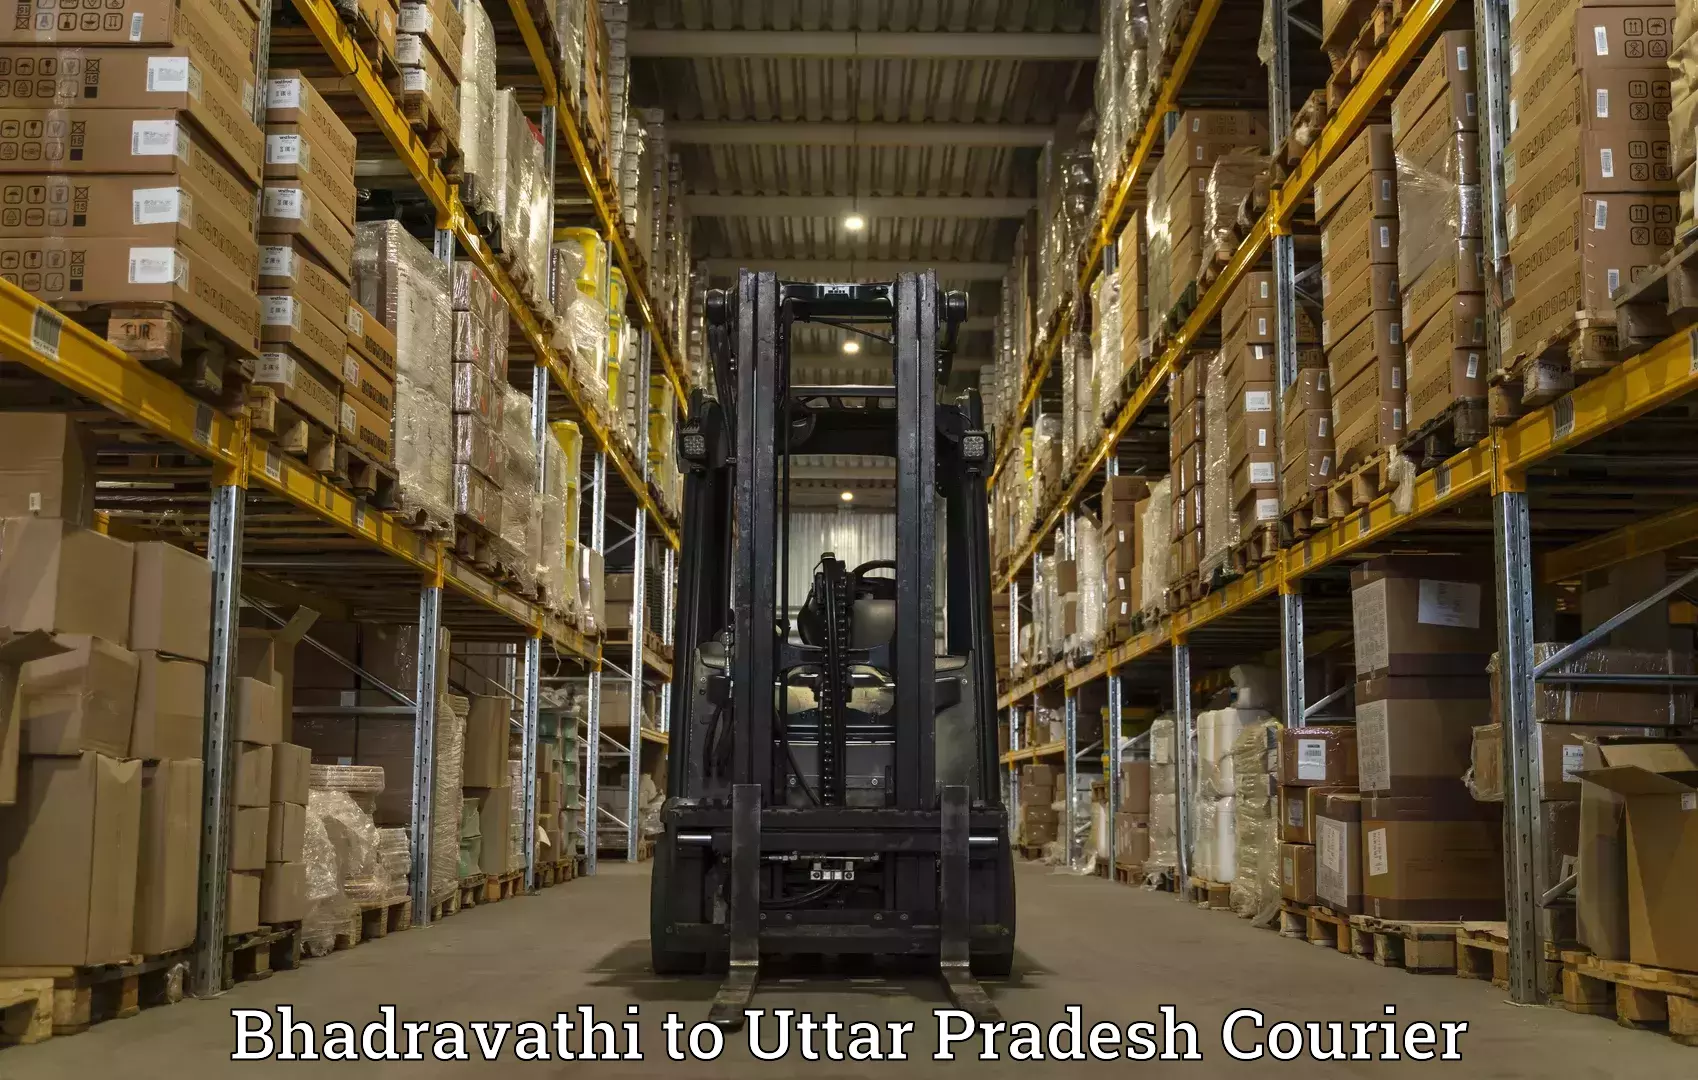 Courier service booking Bhadravathi to Bansi